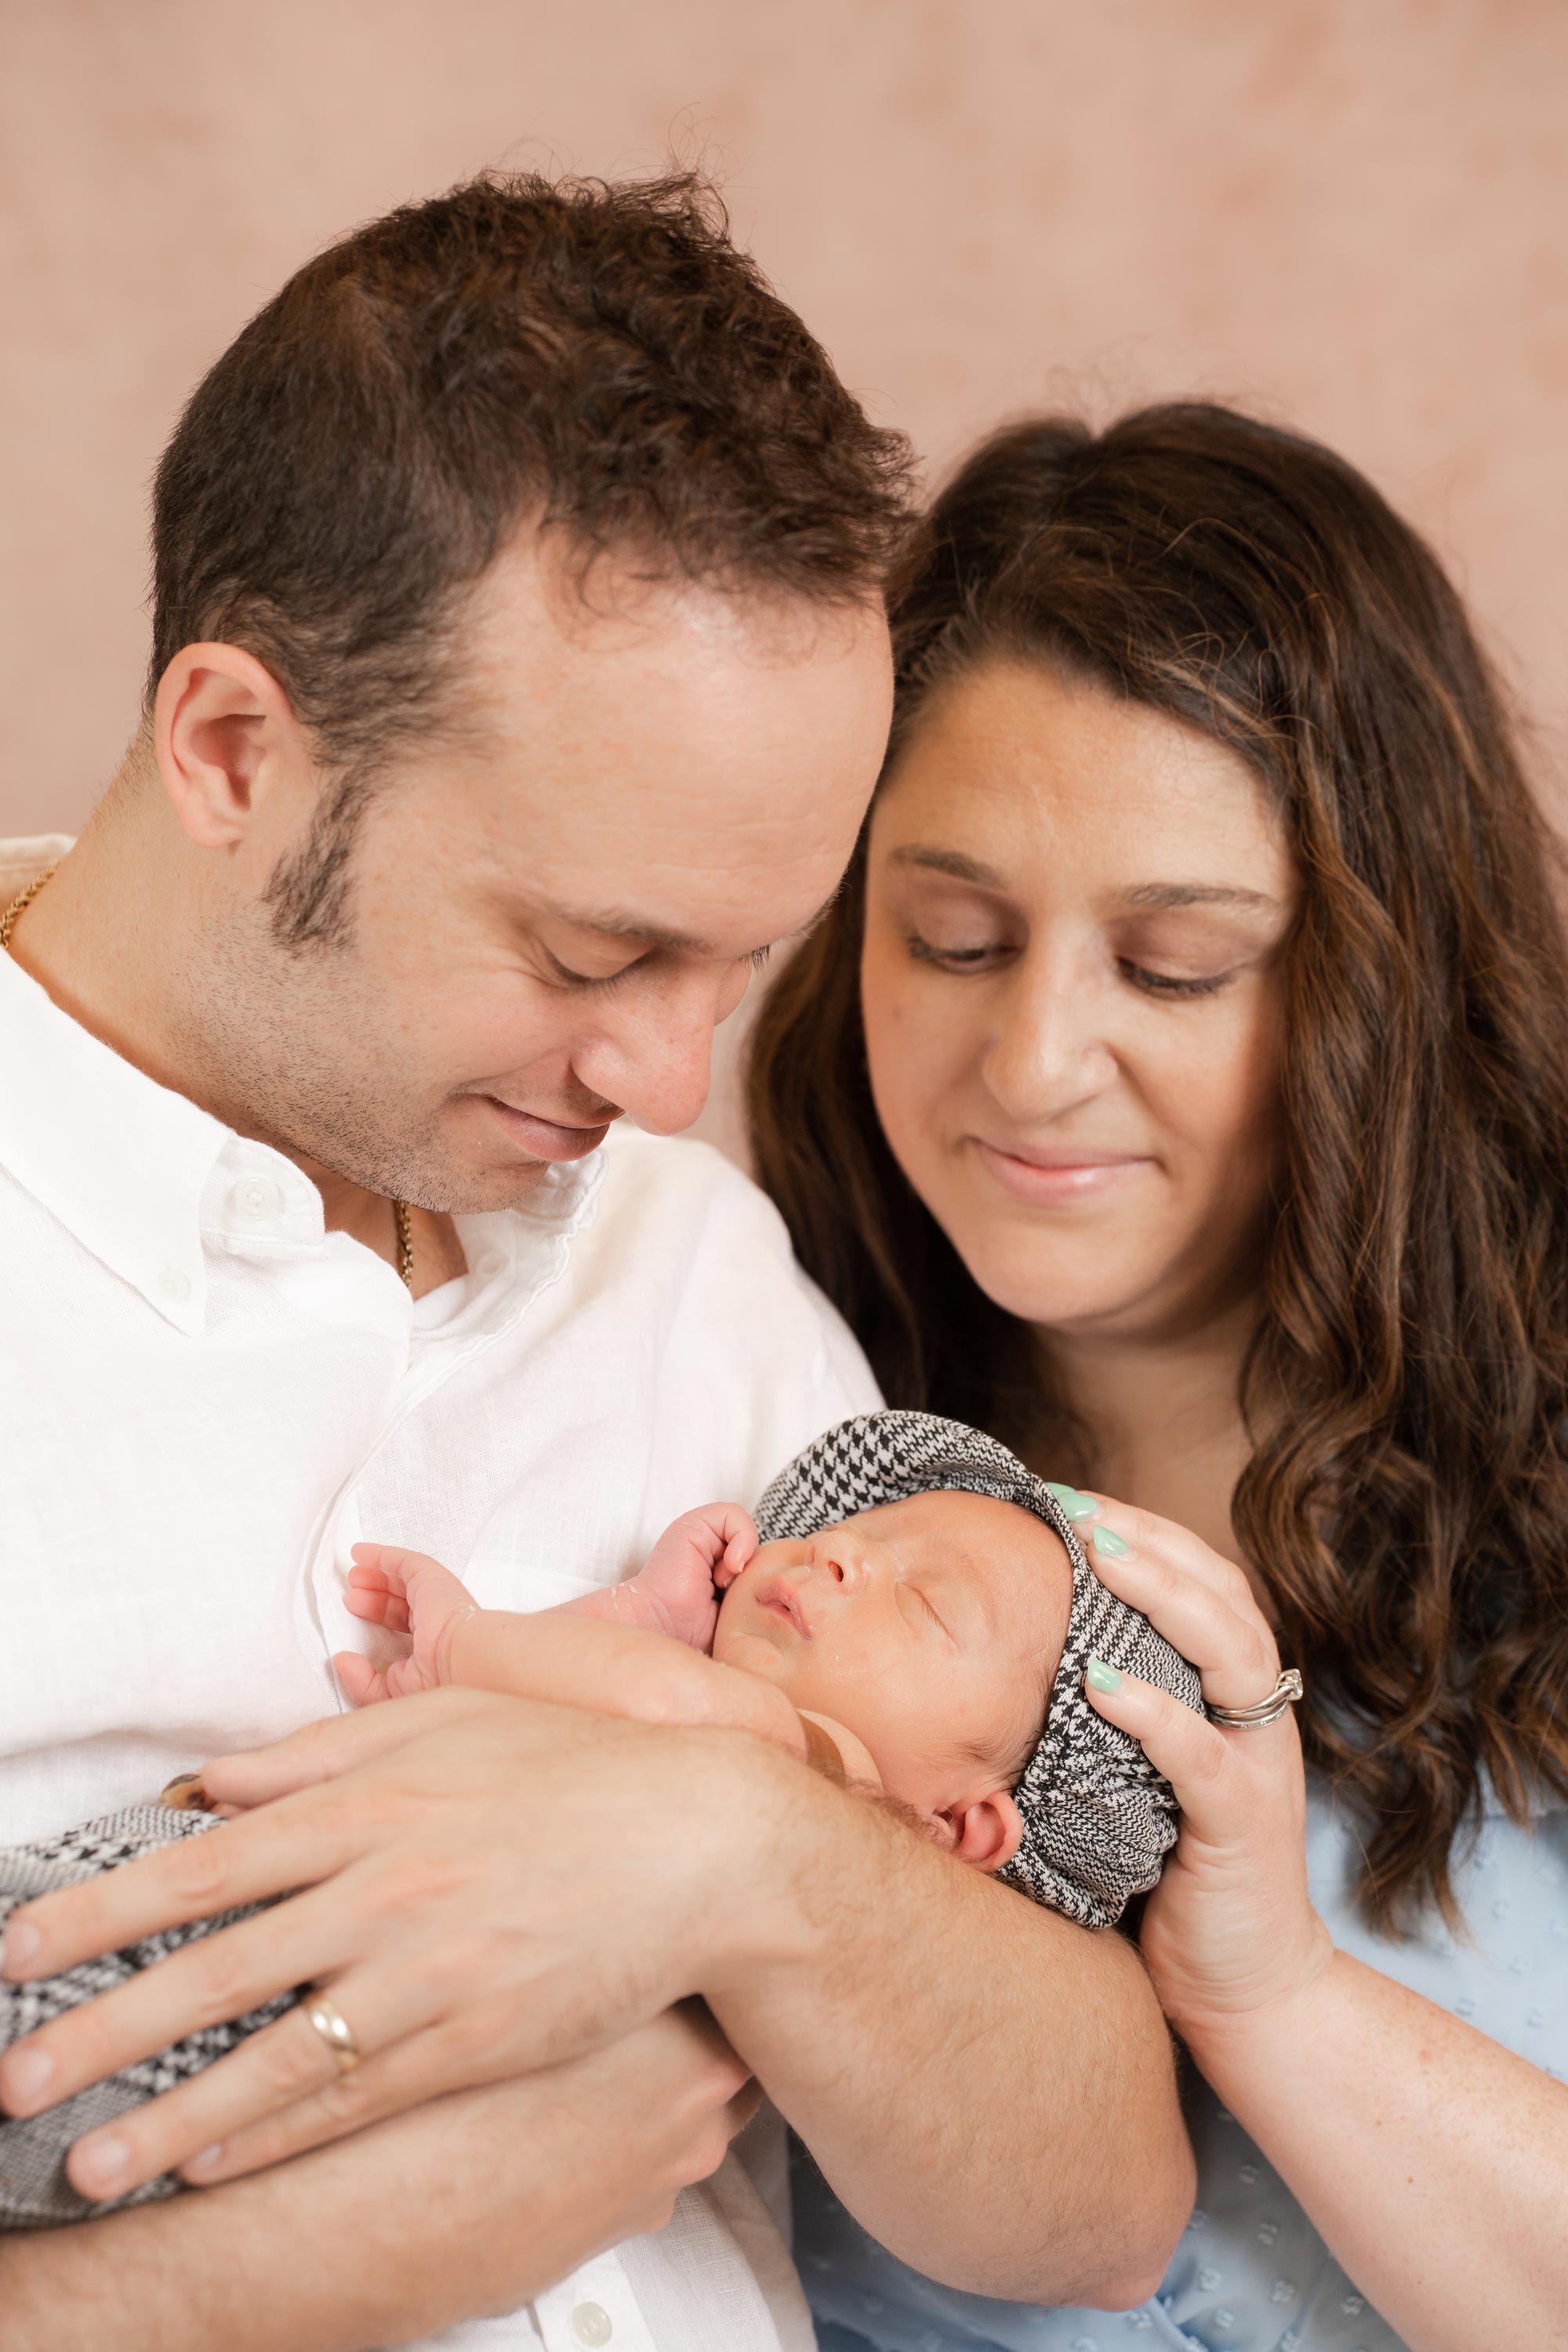 When their clinic missed their IUI window, they tried Mosie and found success!